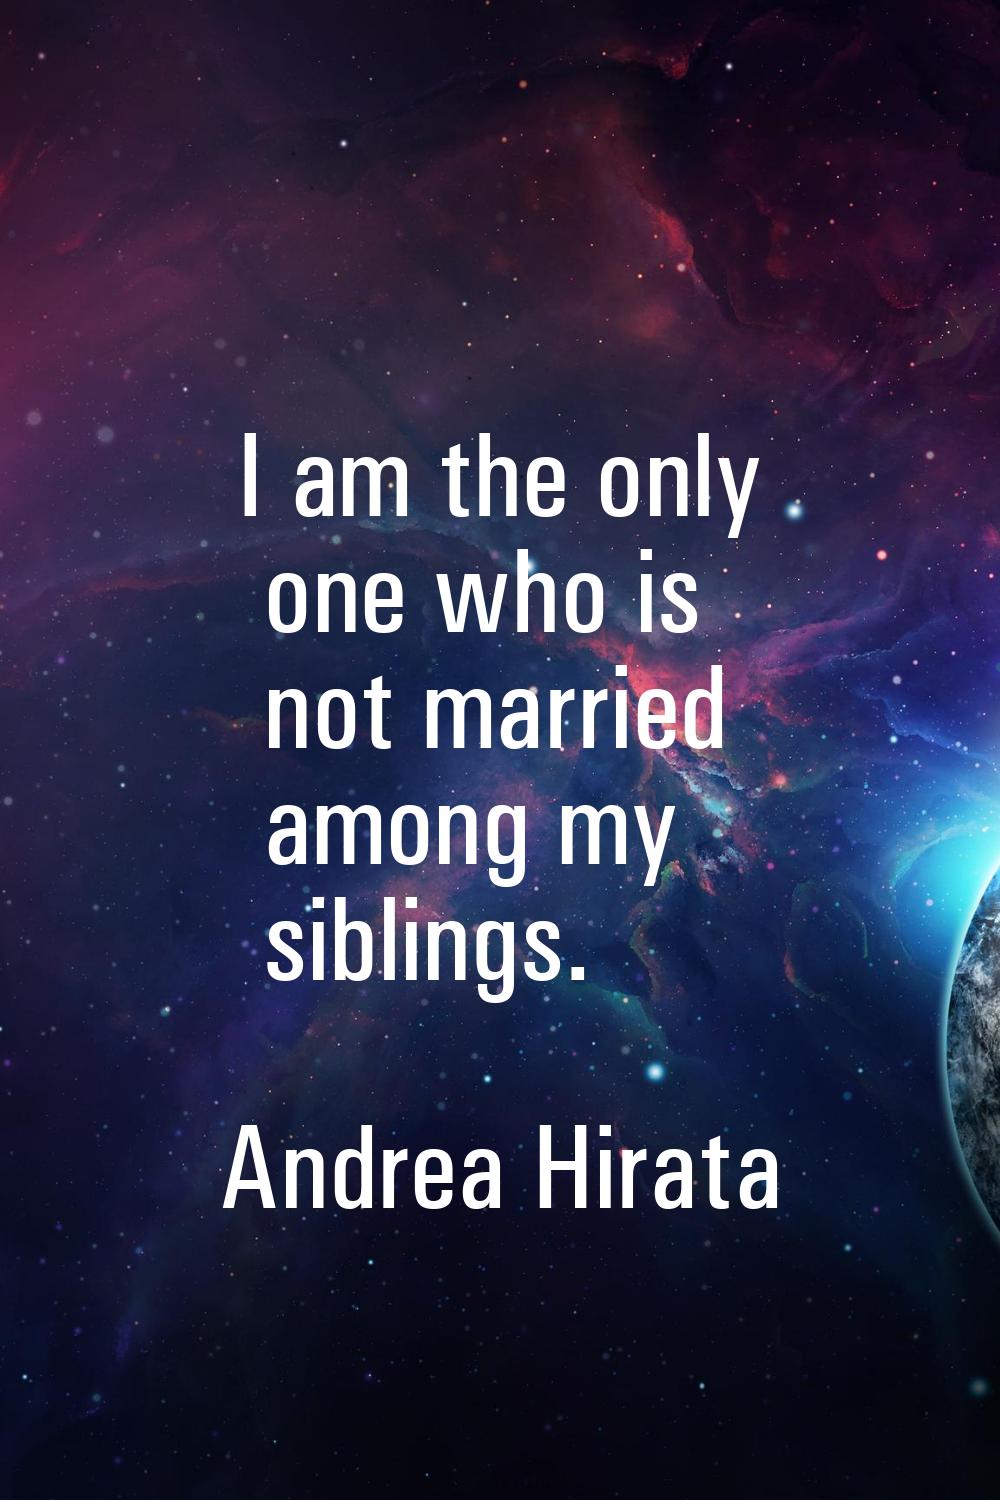 I am the only one who is not married among my siblings.